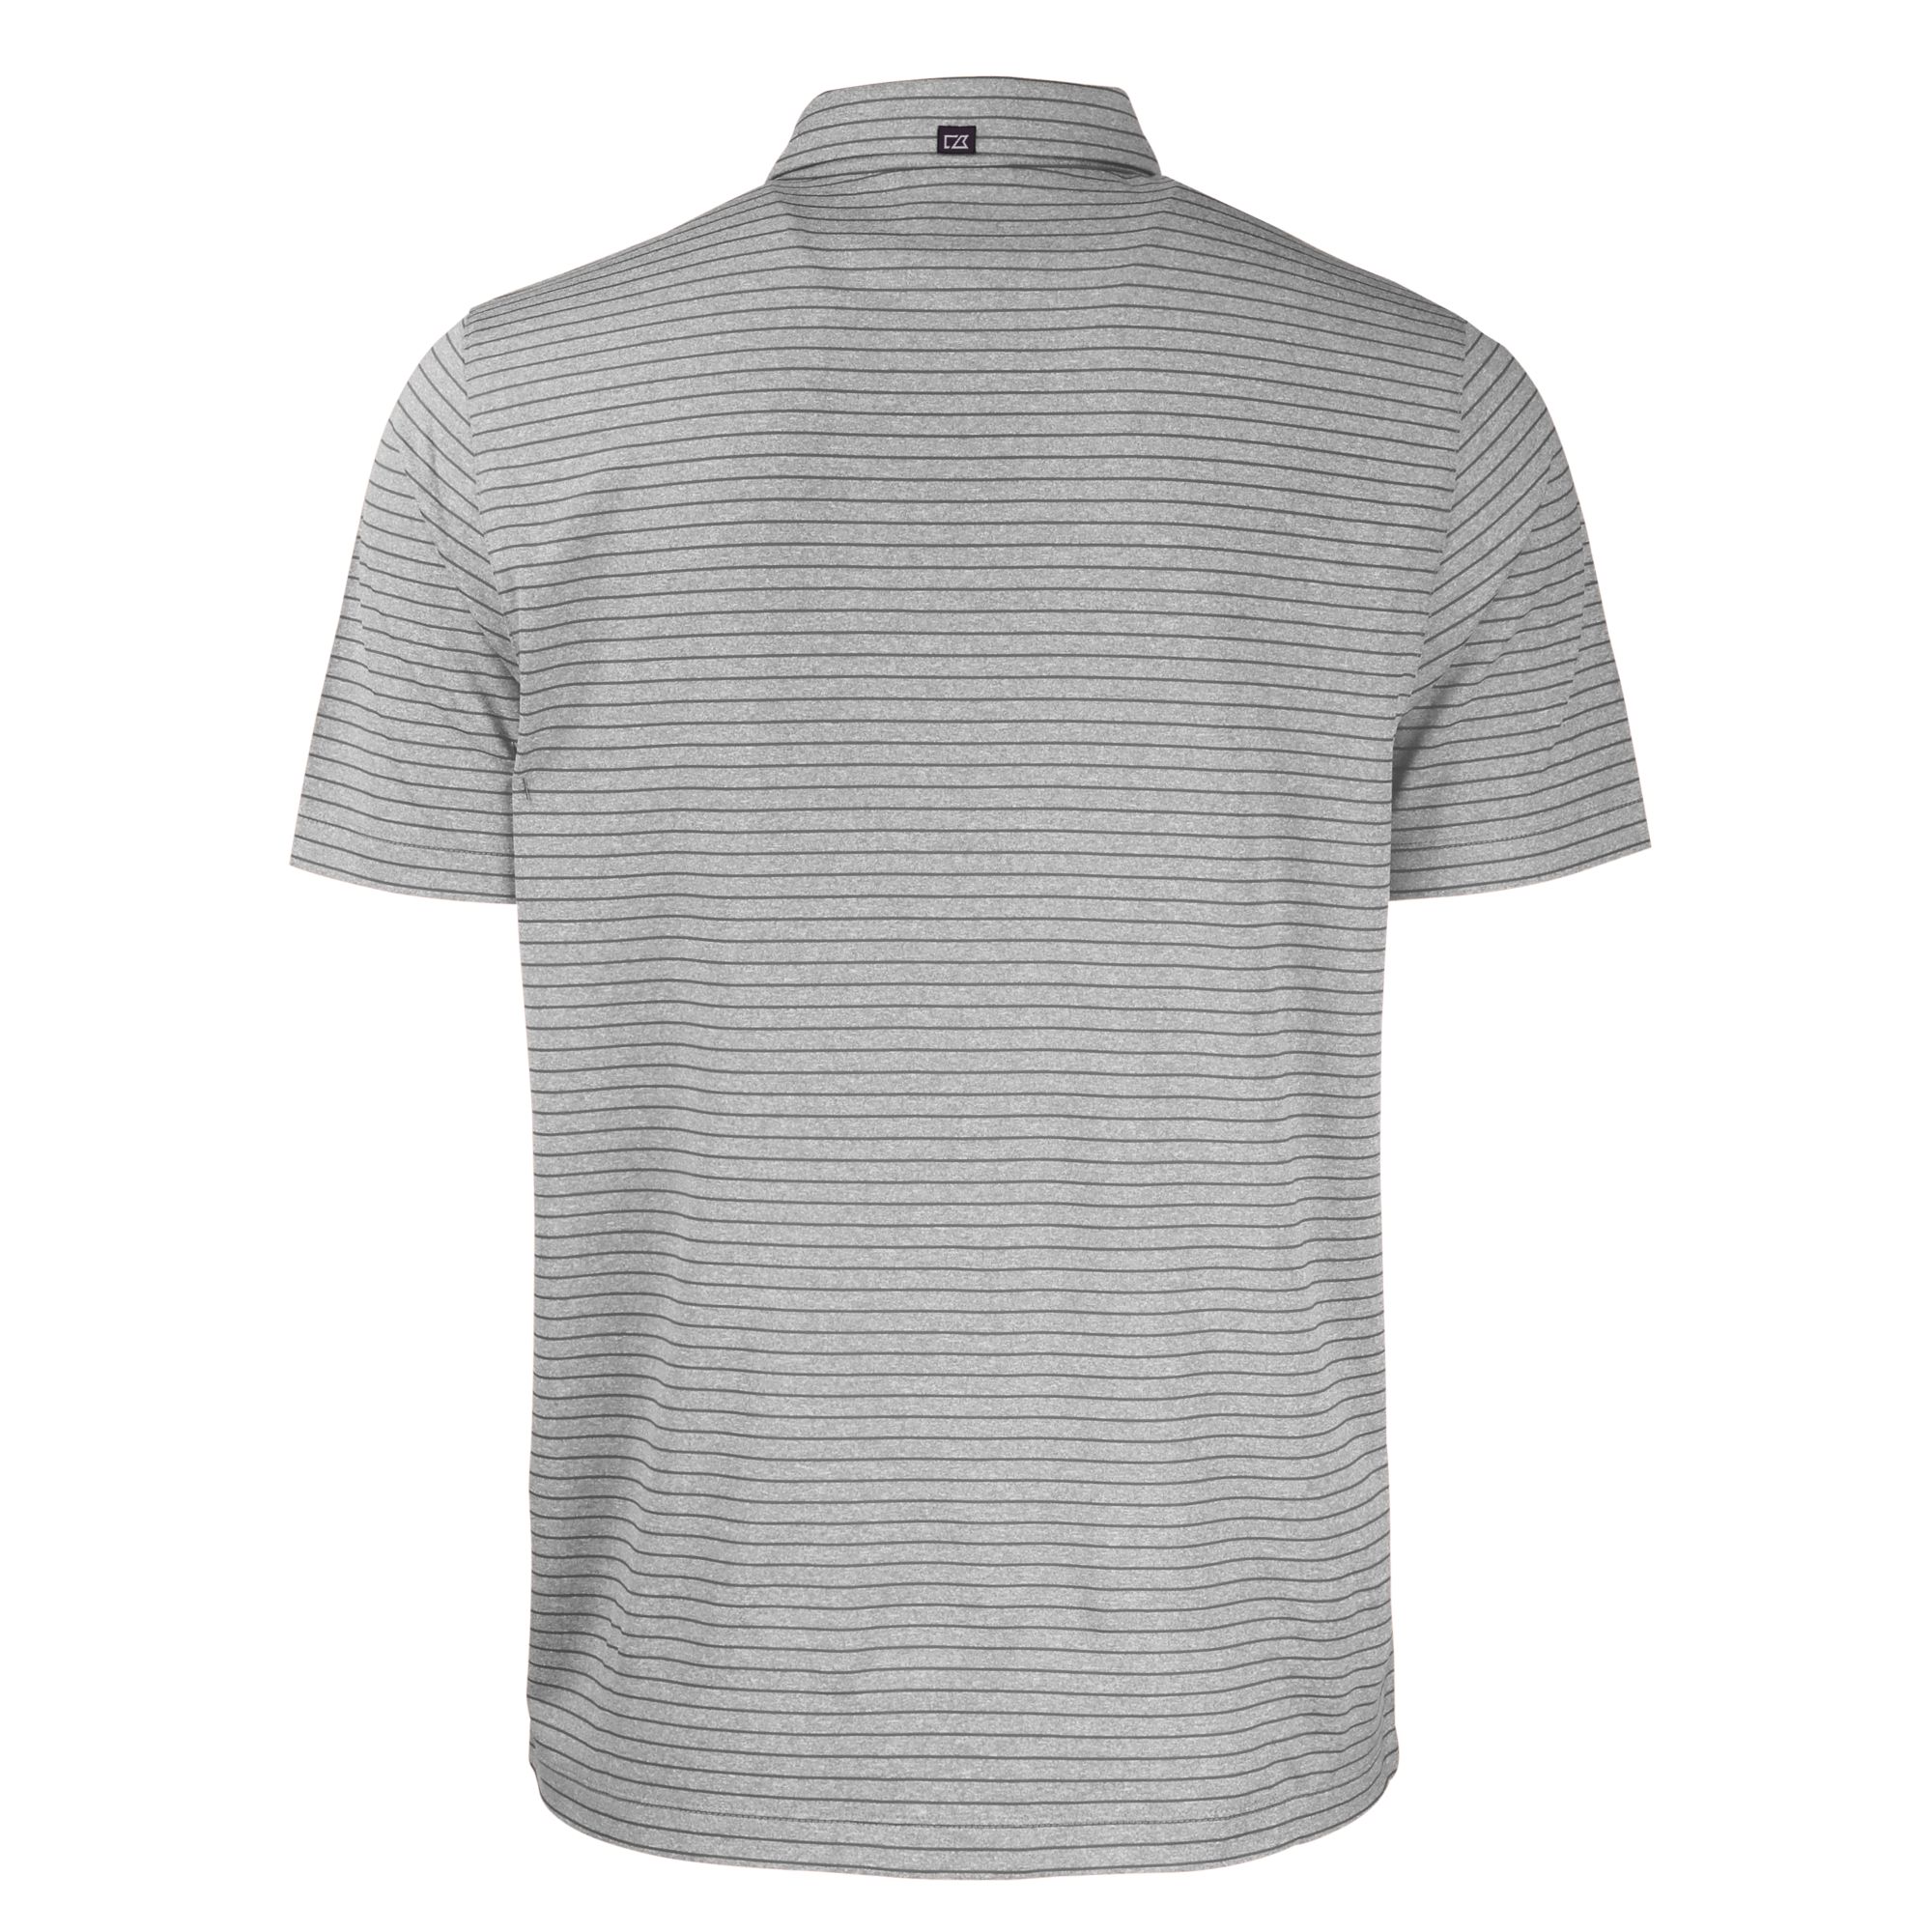 Men's Cutter & Buck  Heather Gray Pacific Tigers Big & Tall Forge Eco Heather Stripe Stretch Recycled Polo - image 3 of 3